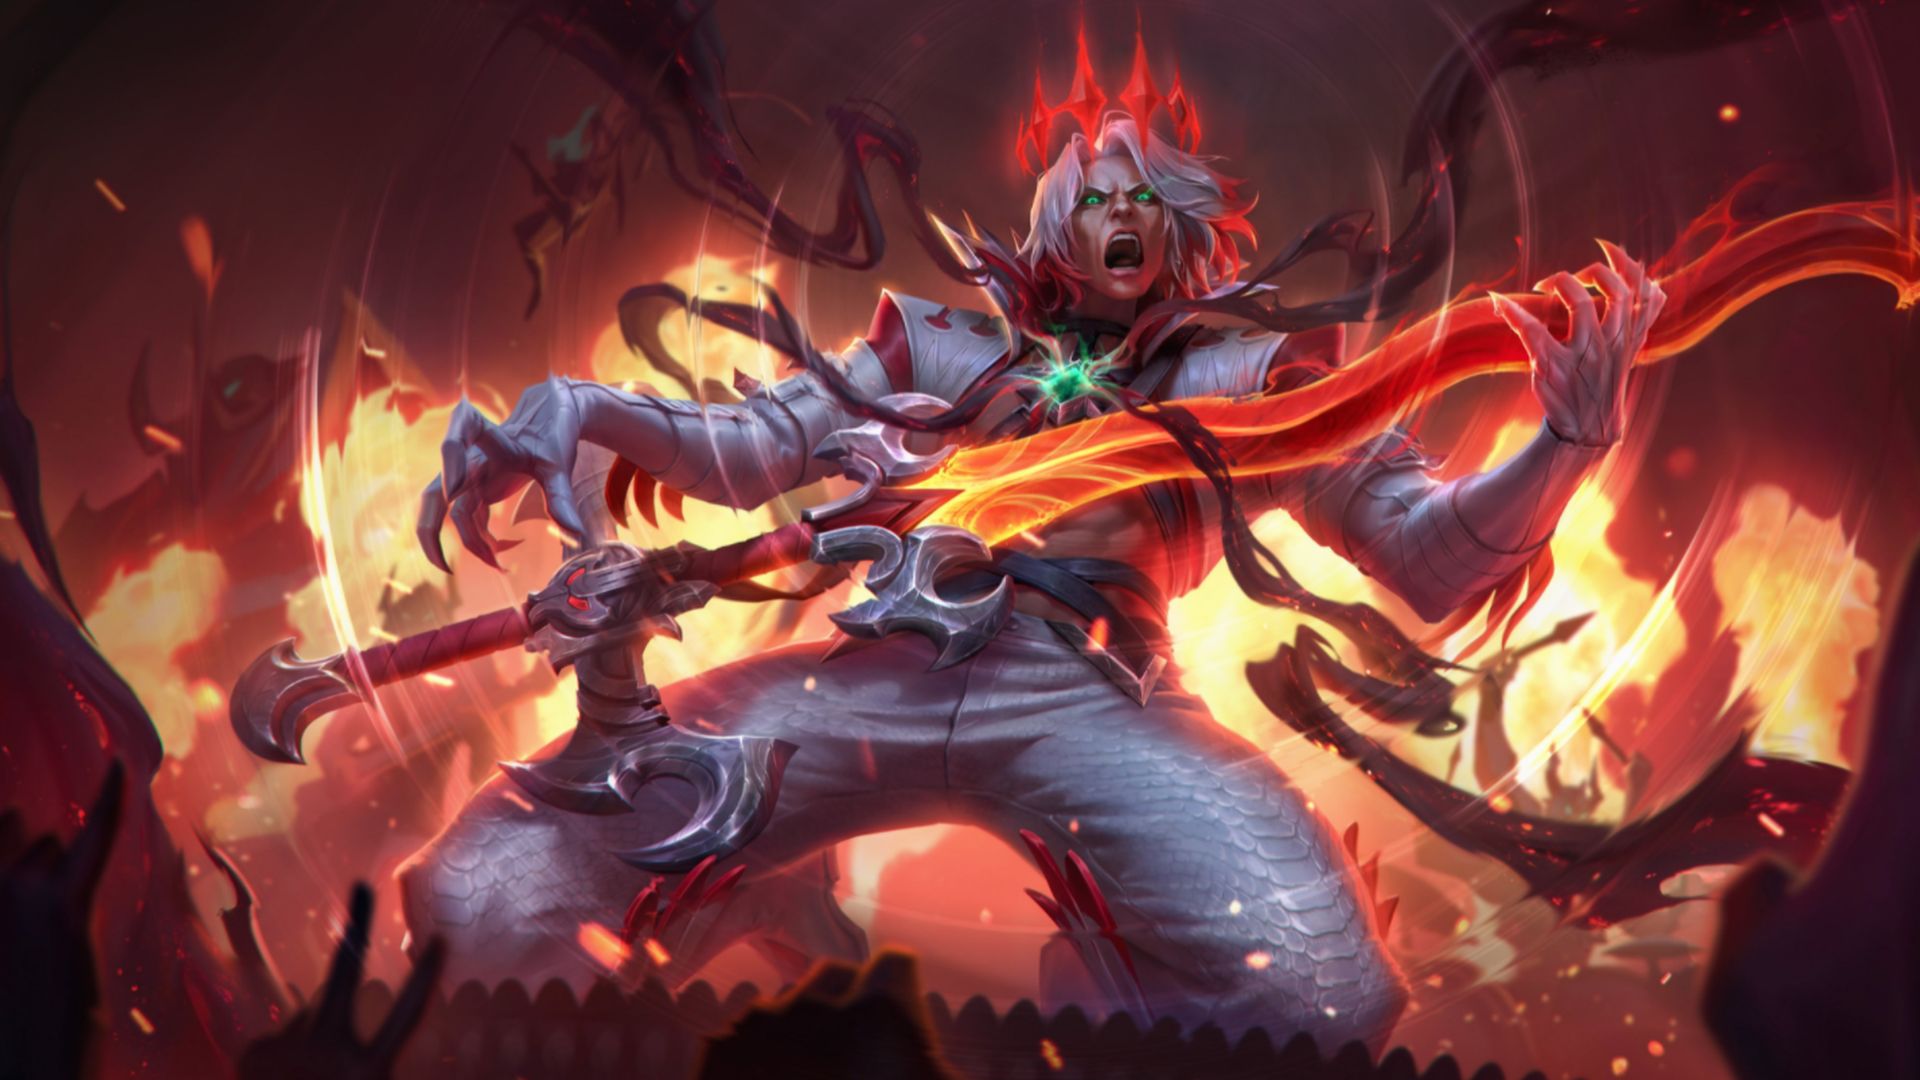 League of Legends’ Viego joins Pentakill and there are brand-new band skins